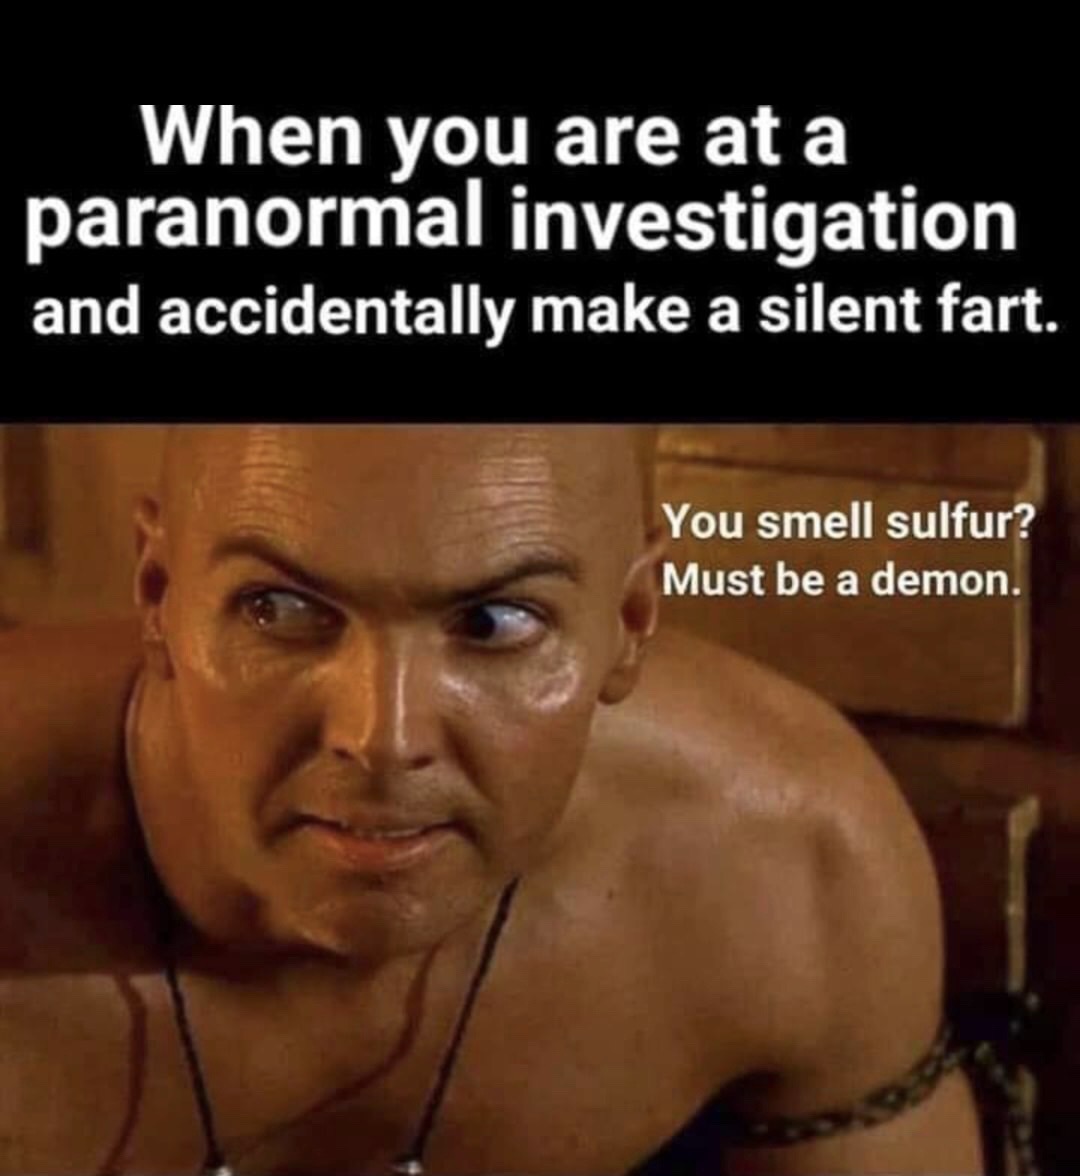 sign - When you are at a paranormal investigation and accidentally make a silent fart. You smell sulfur? Must be a demon.